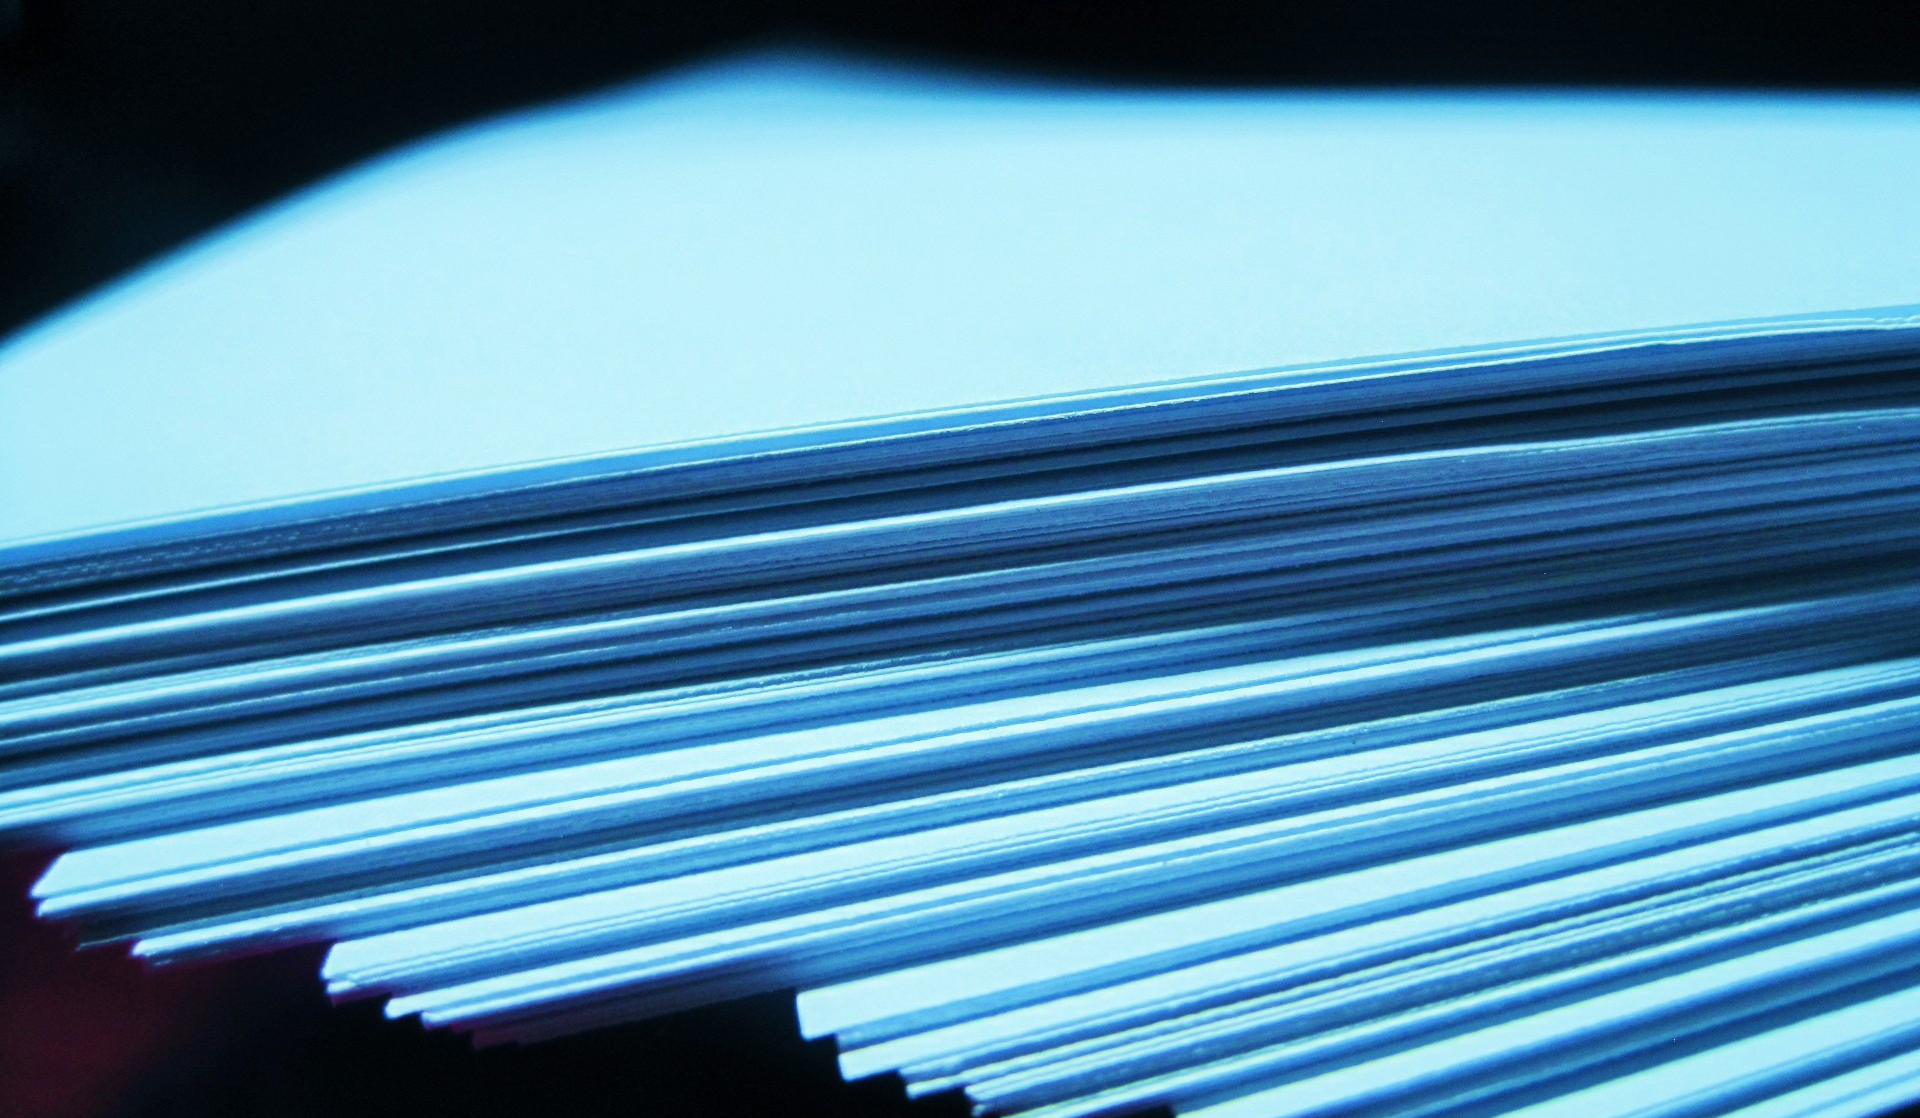 A stack of papers representing the journal 'Interpreting'